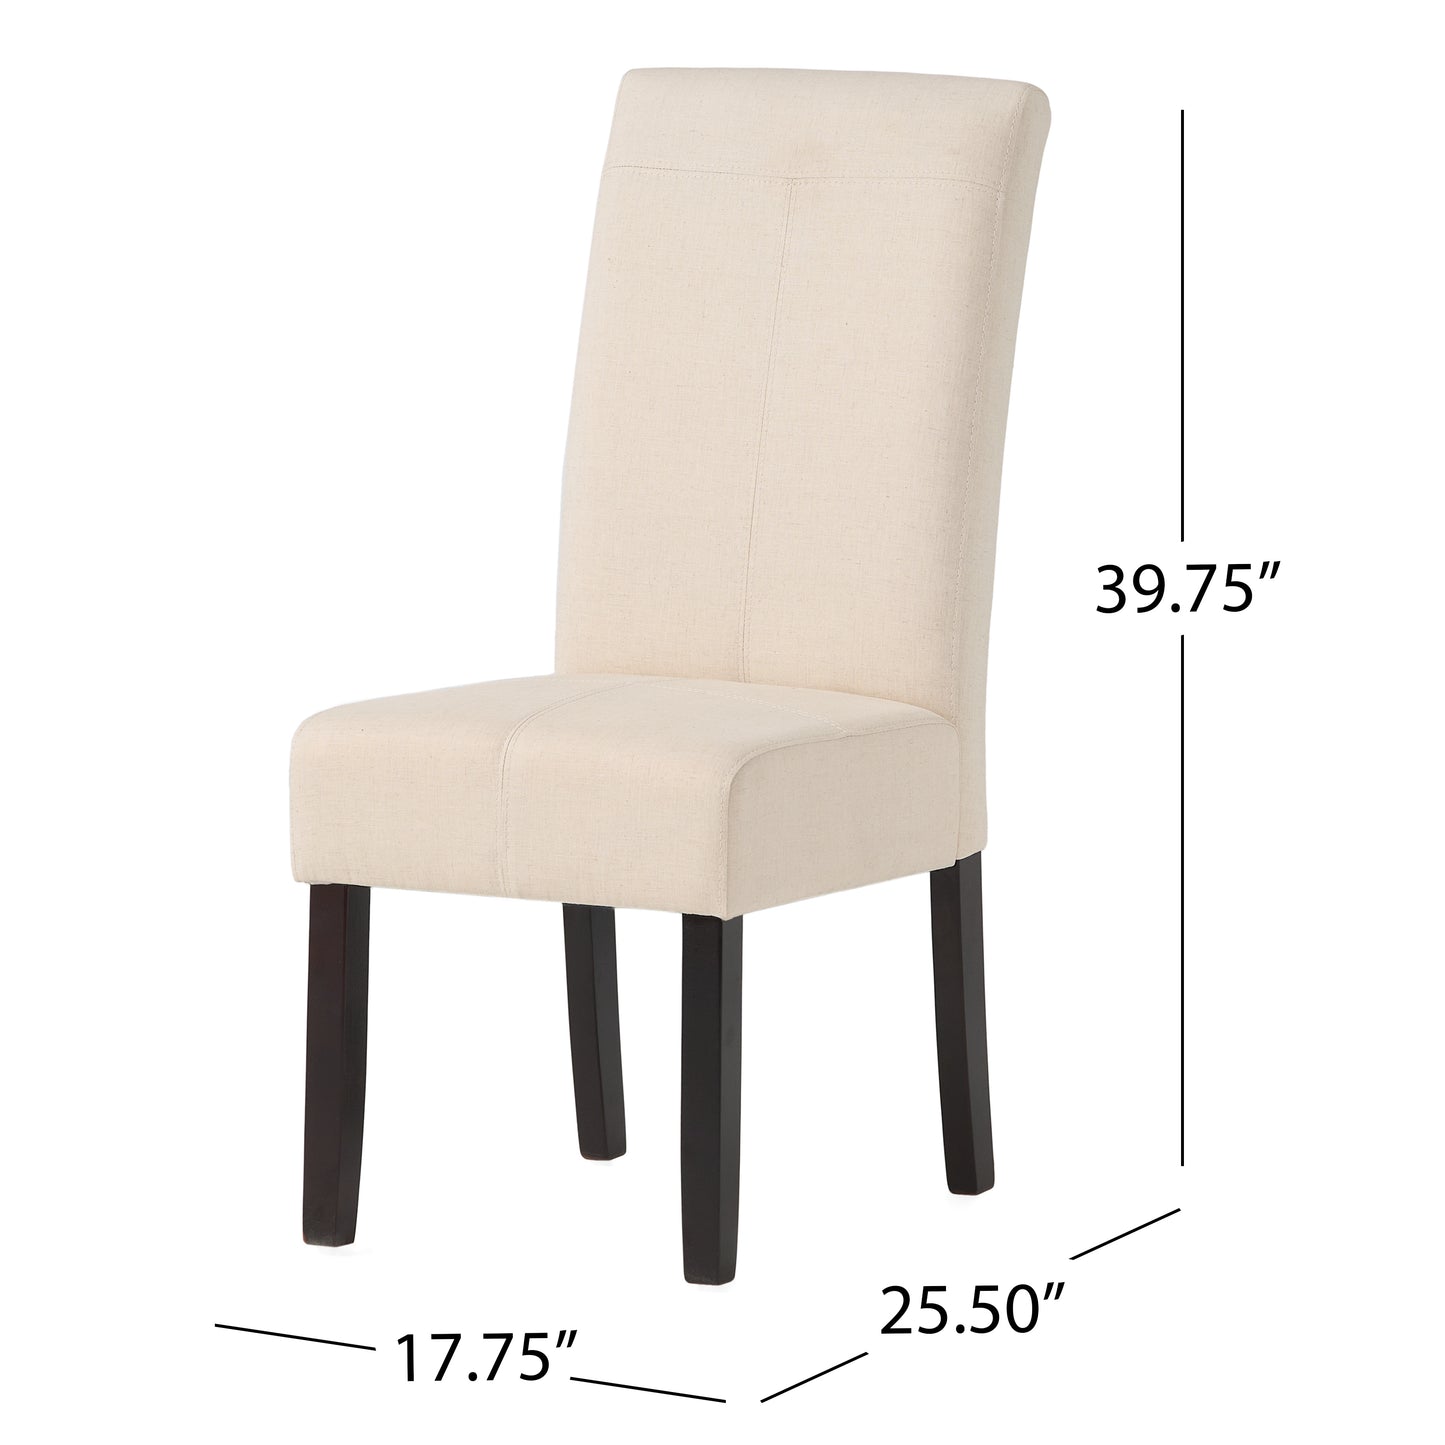 Percival Contemporary T-Stitch Fabric Dining Chairs (Set of 2)